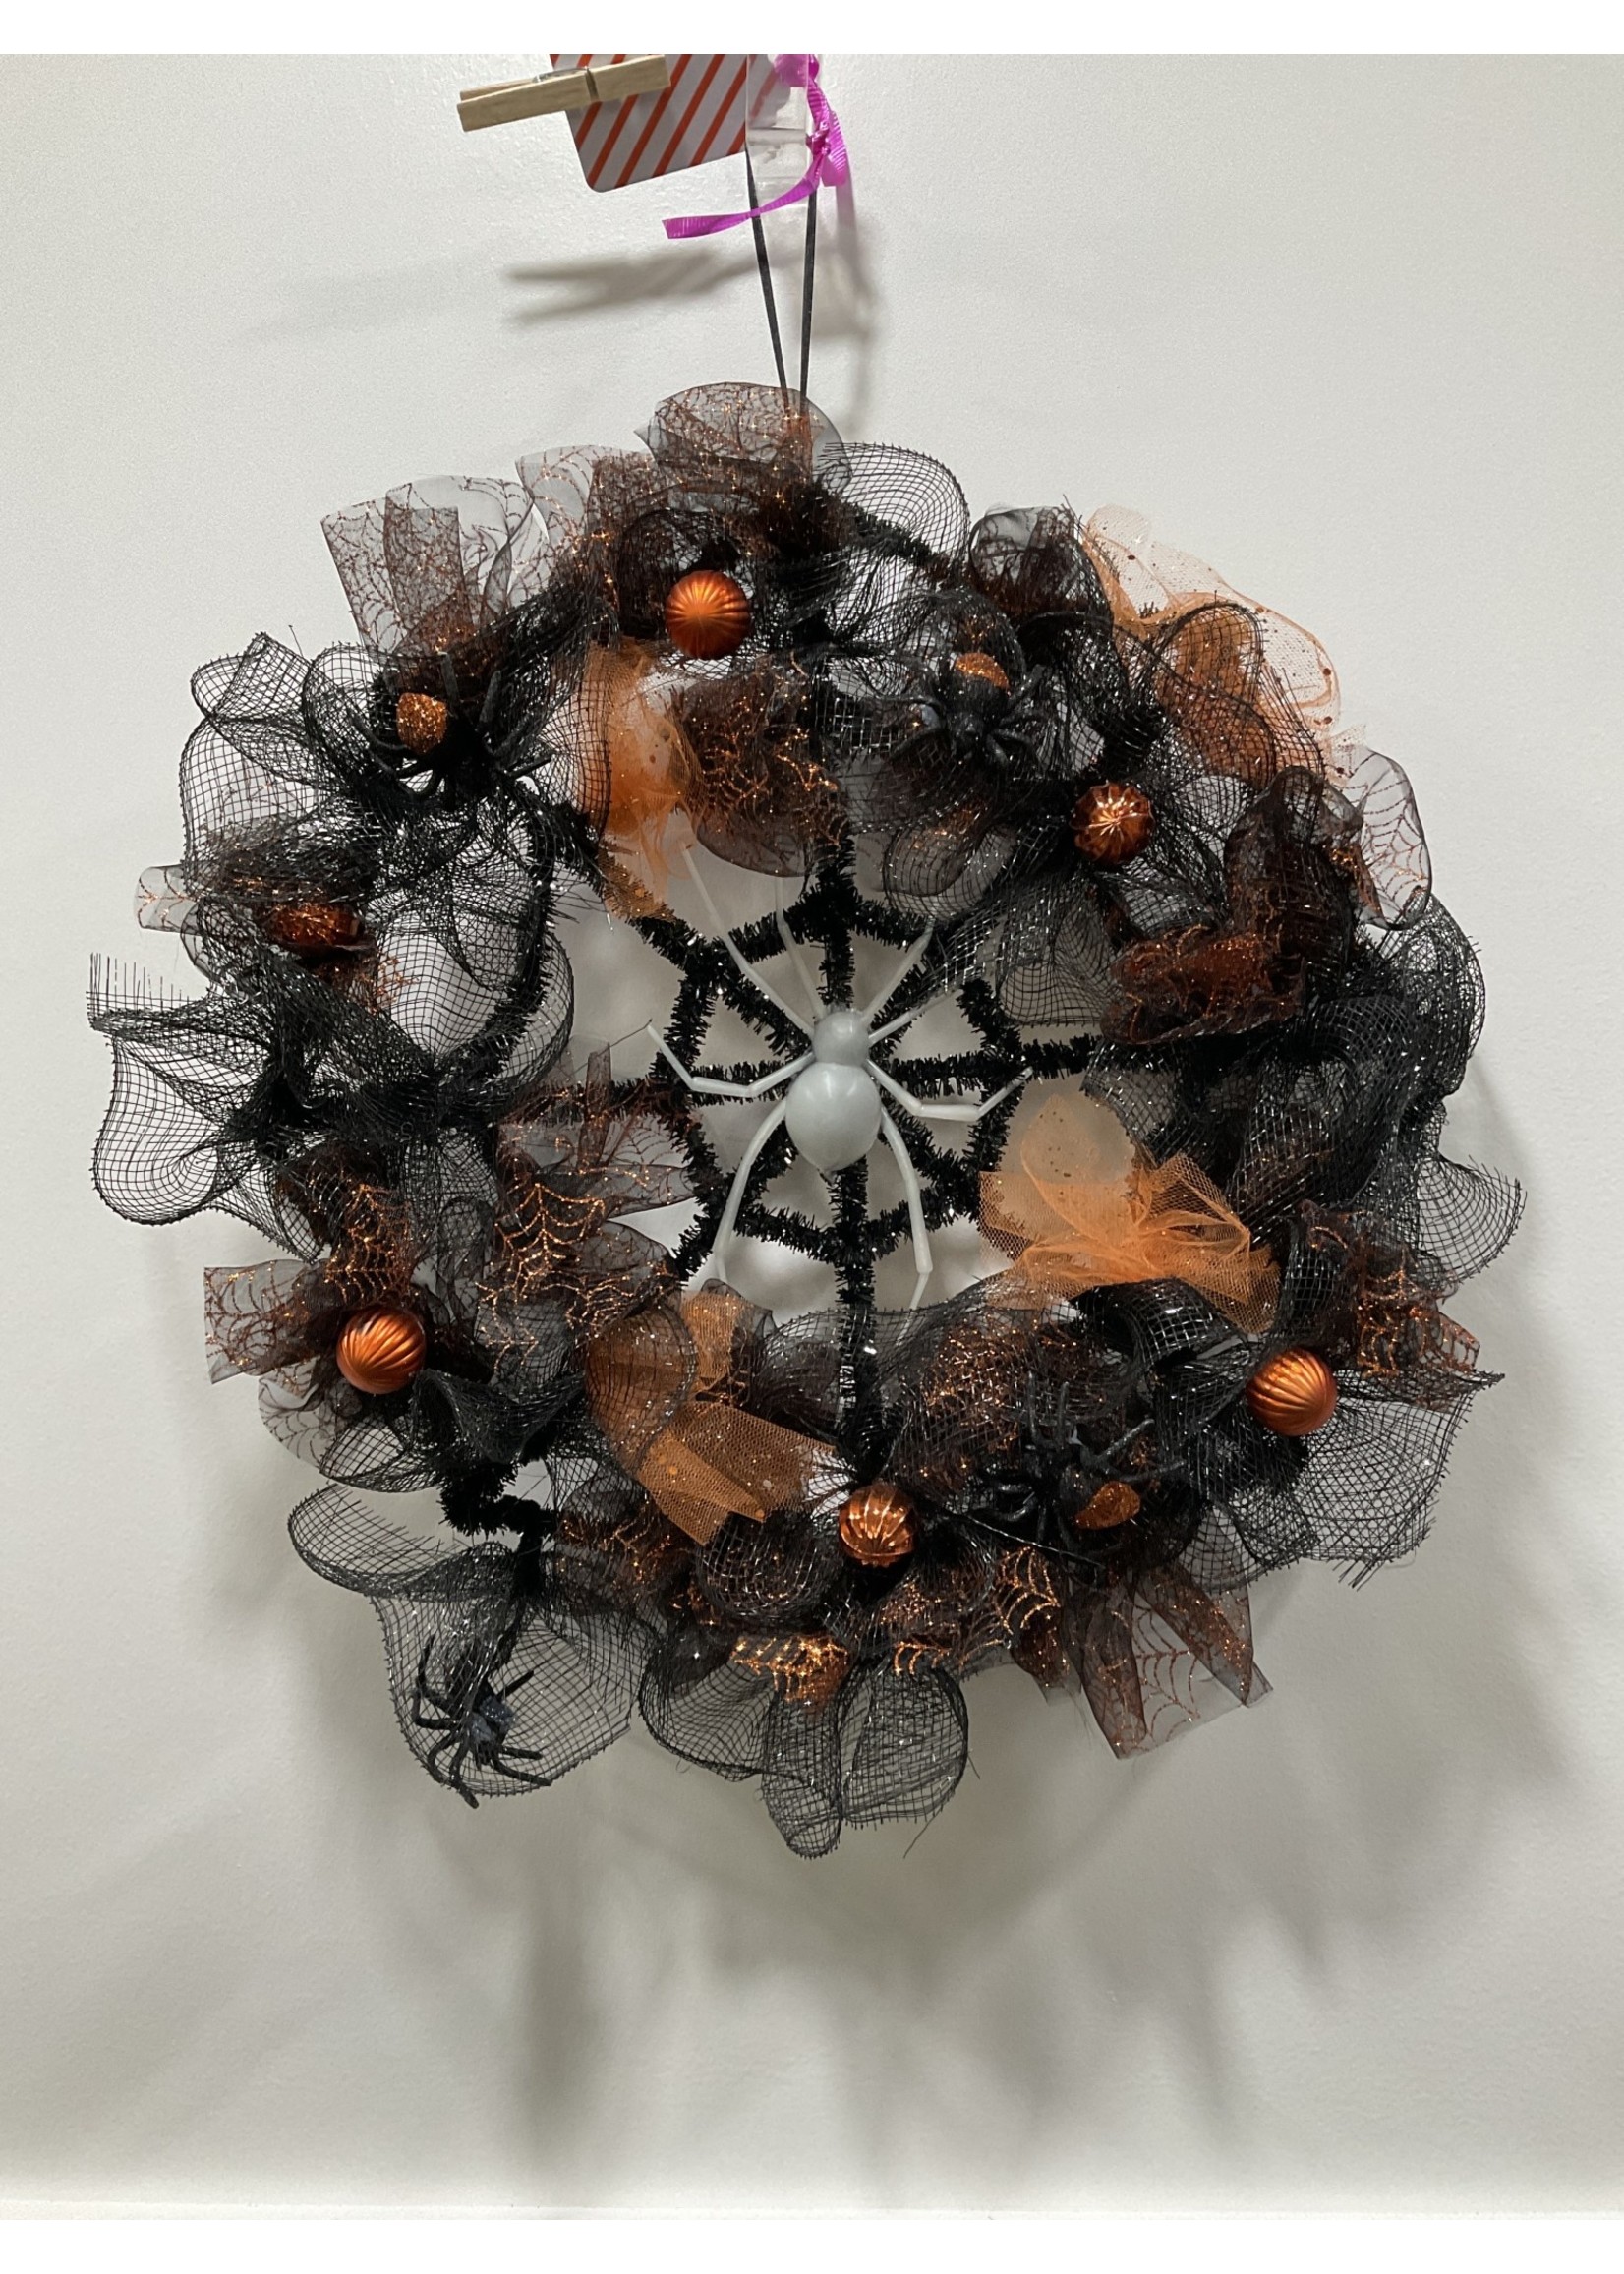 My New Favorite Thing 1827 Wreath Mesh Spider 18 in-Black and Orange w/Spiders and Orange Bulbs